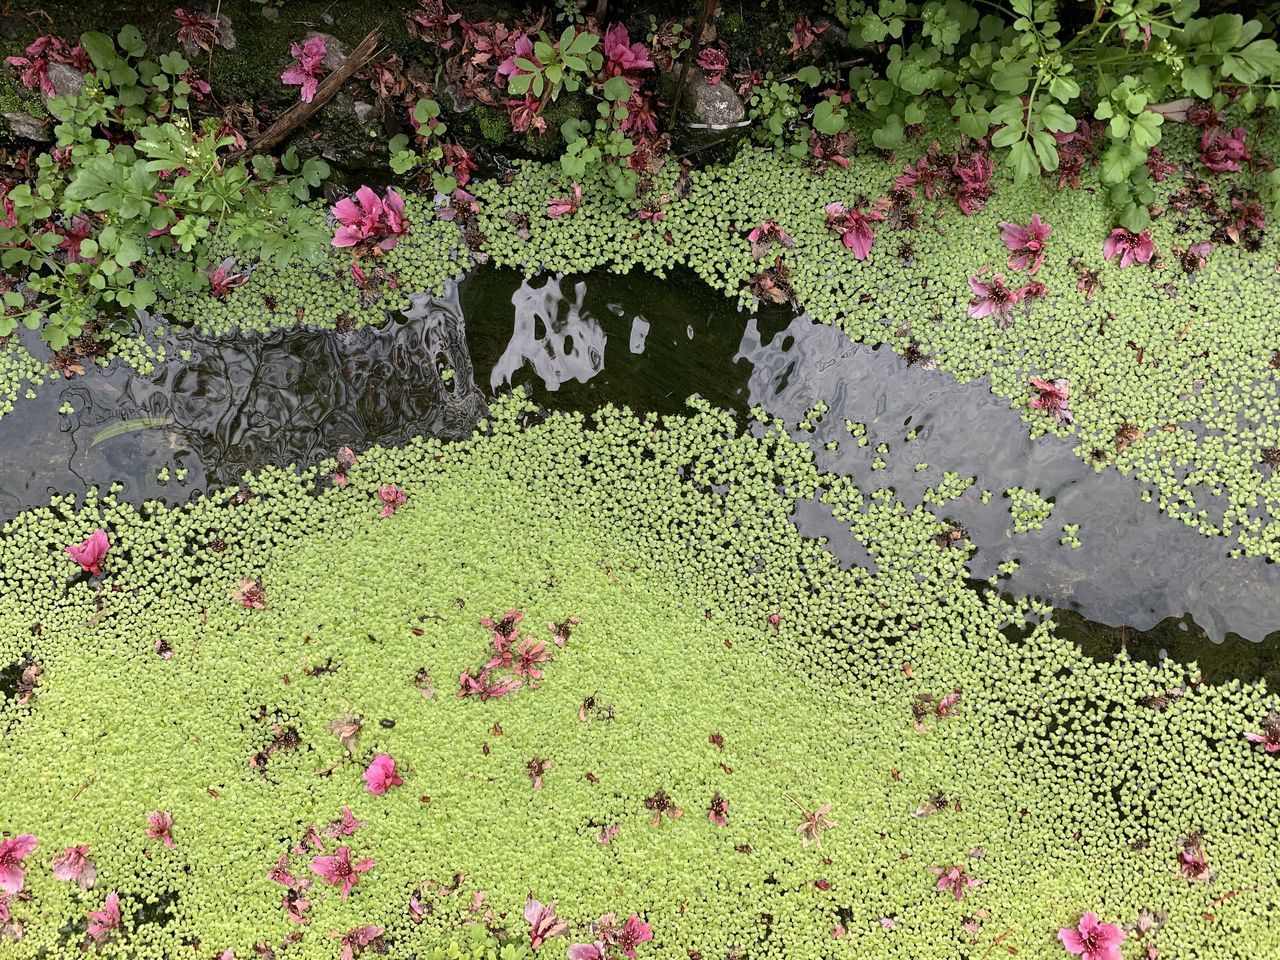 HIGH ANGLE VIEW OF PINK FLOWERING PLANTS IN WATER